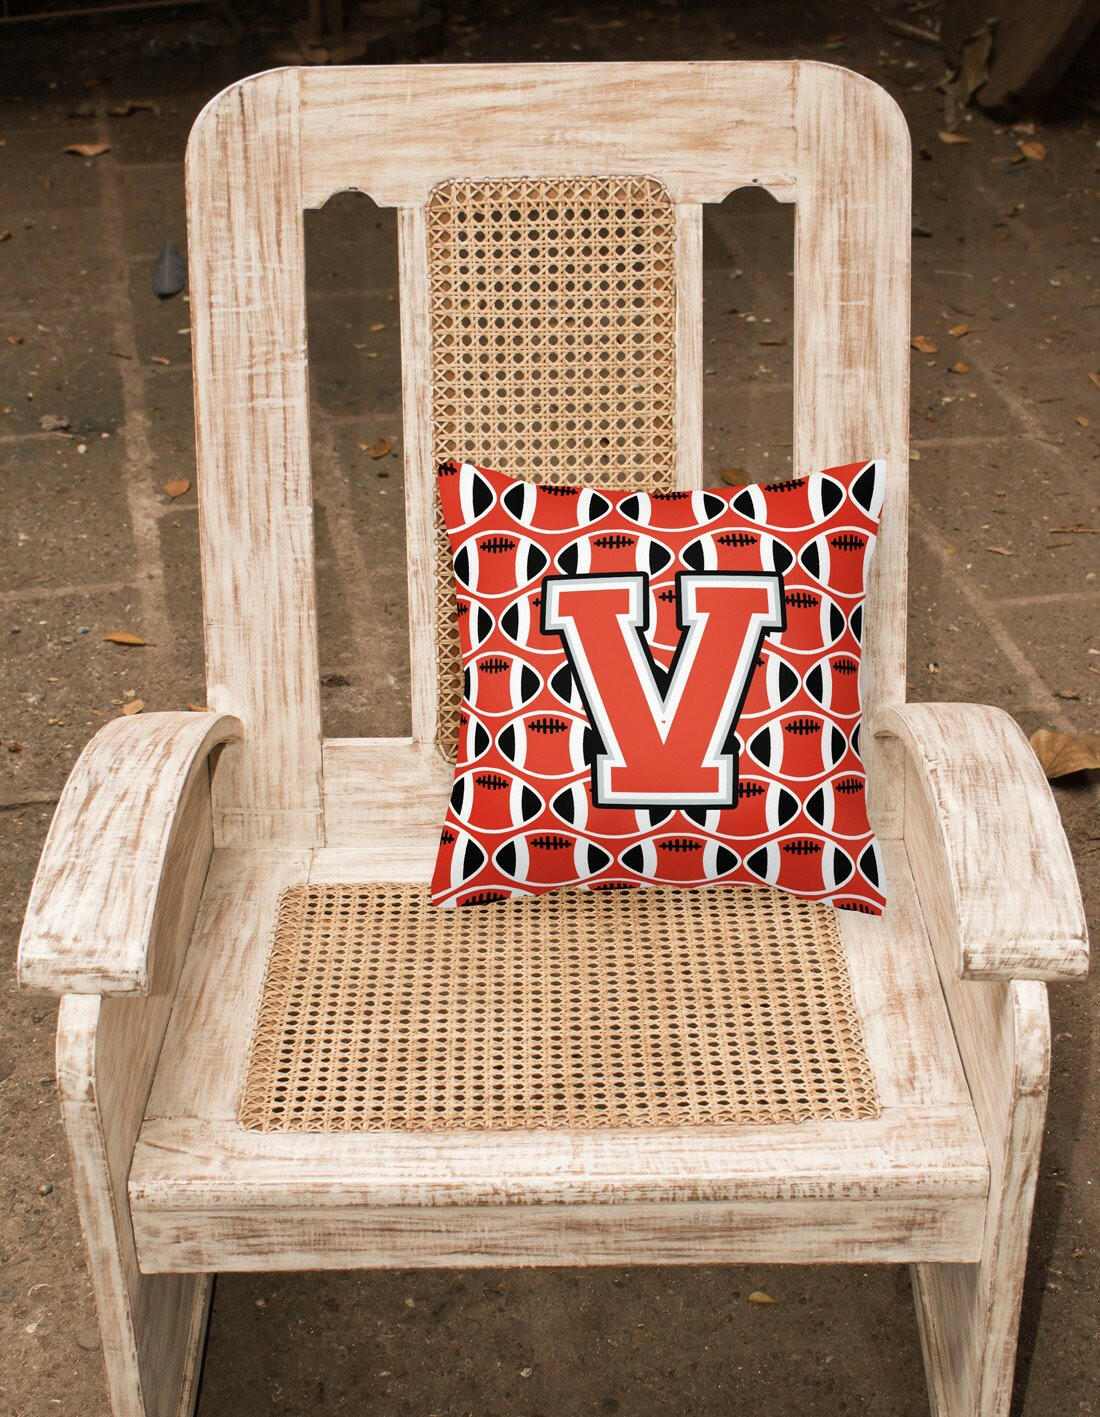 Letter V Football Scarlet and Grey Fabric Decorative Pillow CJ1067-VPW1414 by Caroline's Treasures